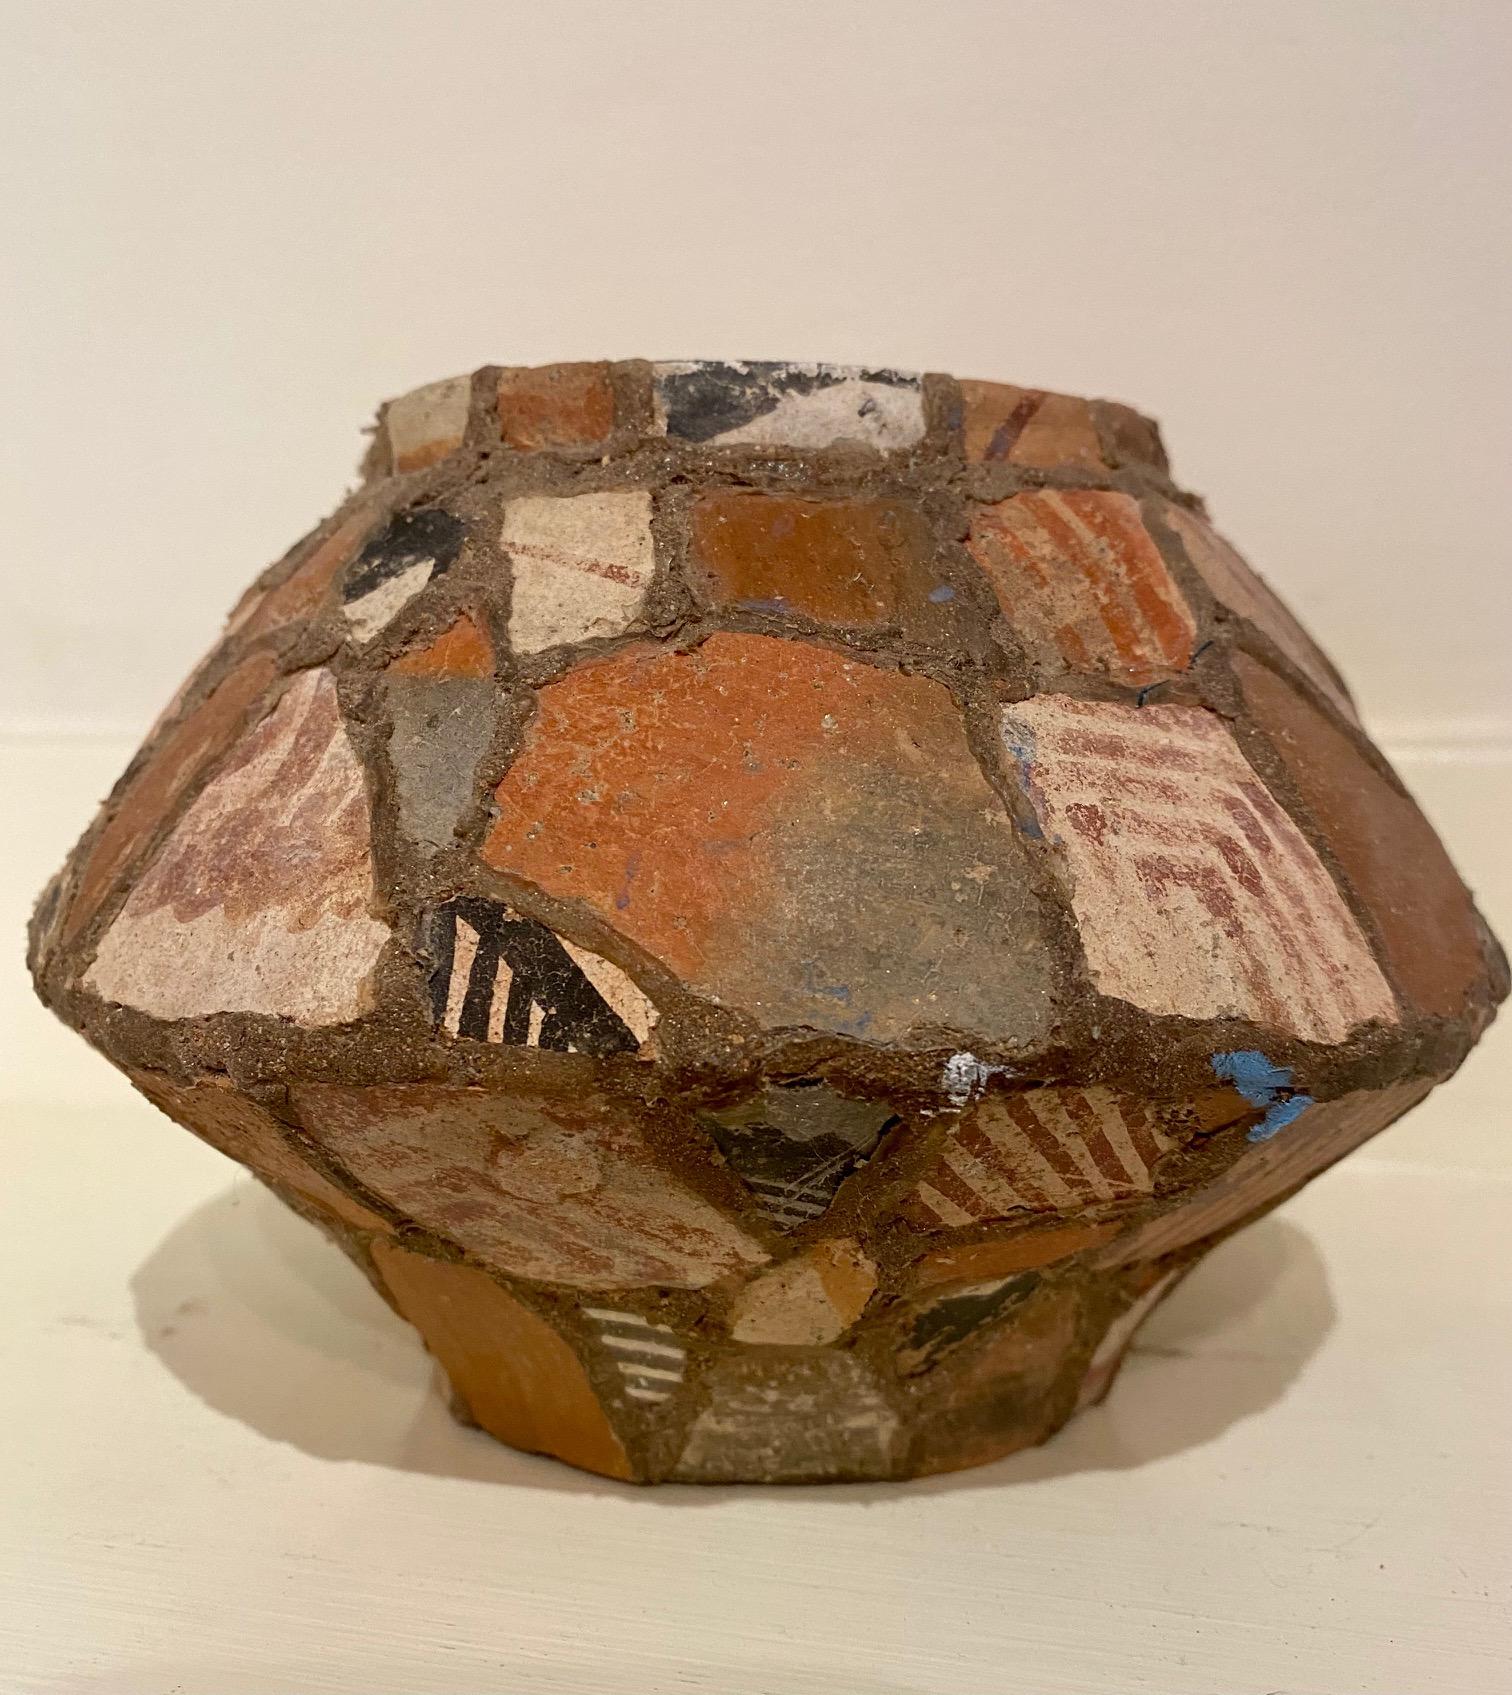 Unique Arts and Crafts period Southwestern pot made from Ancient Anasazi Shards, circa 1910. A hand molded earthenware Olla that has been covered with a mosaic of Pre-Historic Anasazi pottery shards. The Anasazi were ancient pueblo dwellers (circa